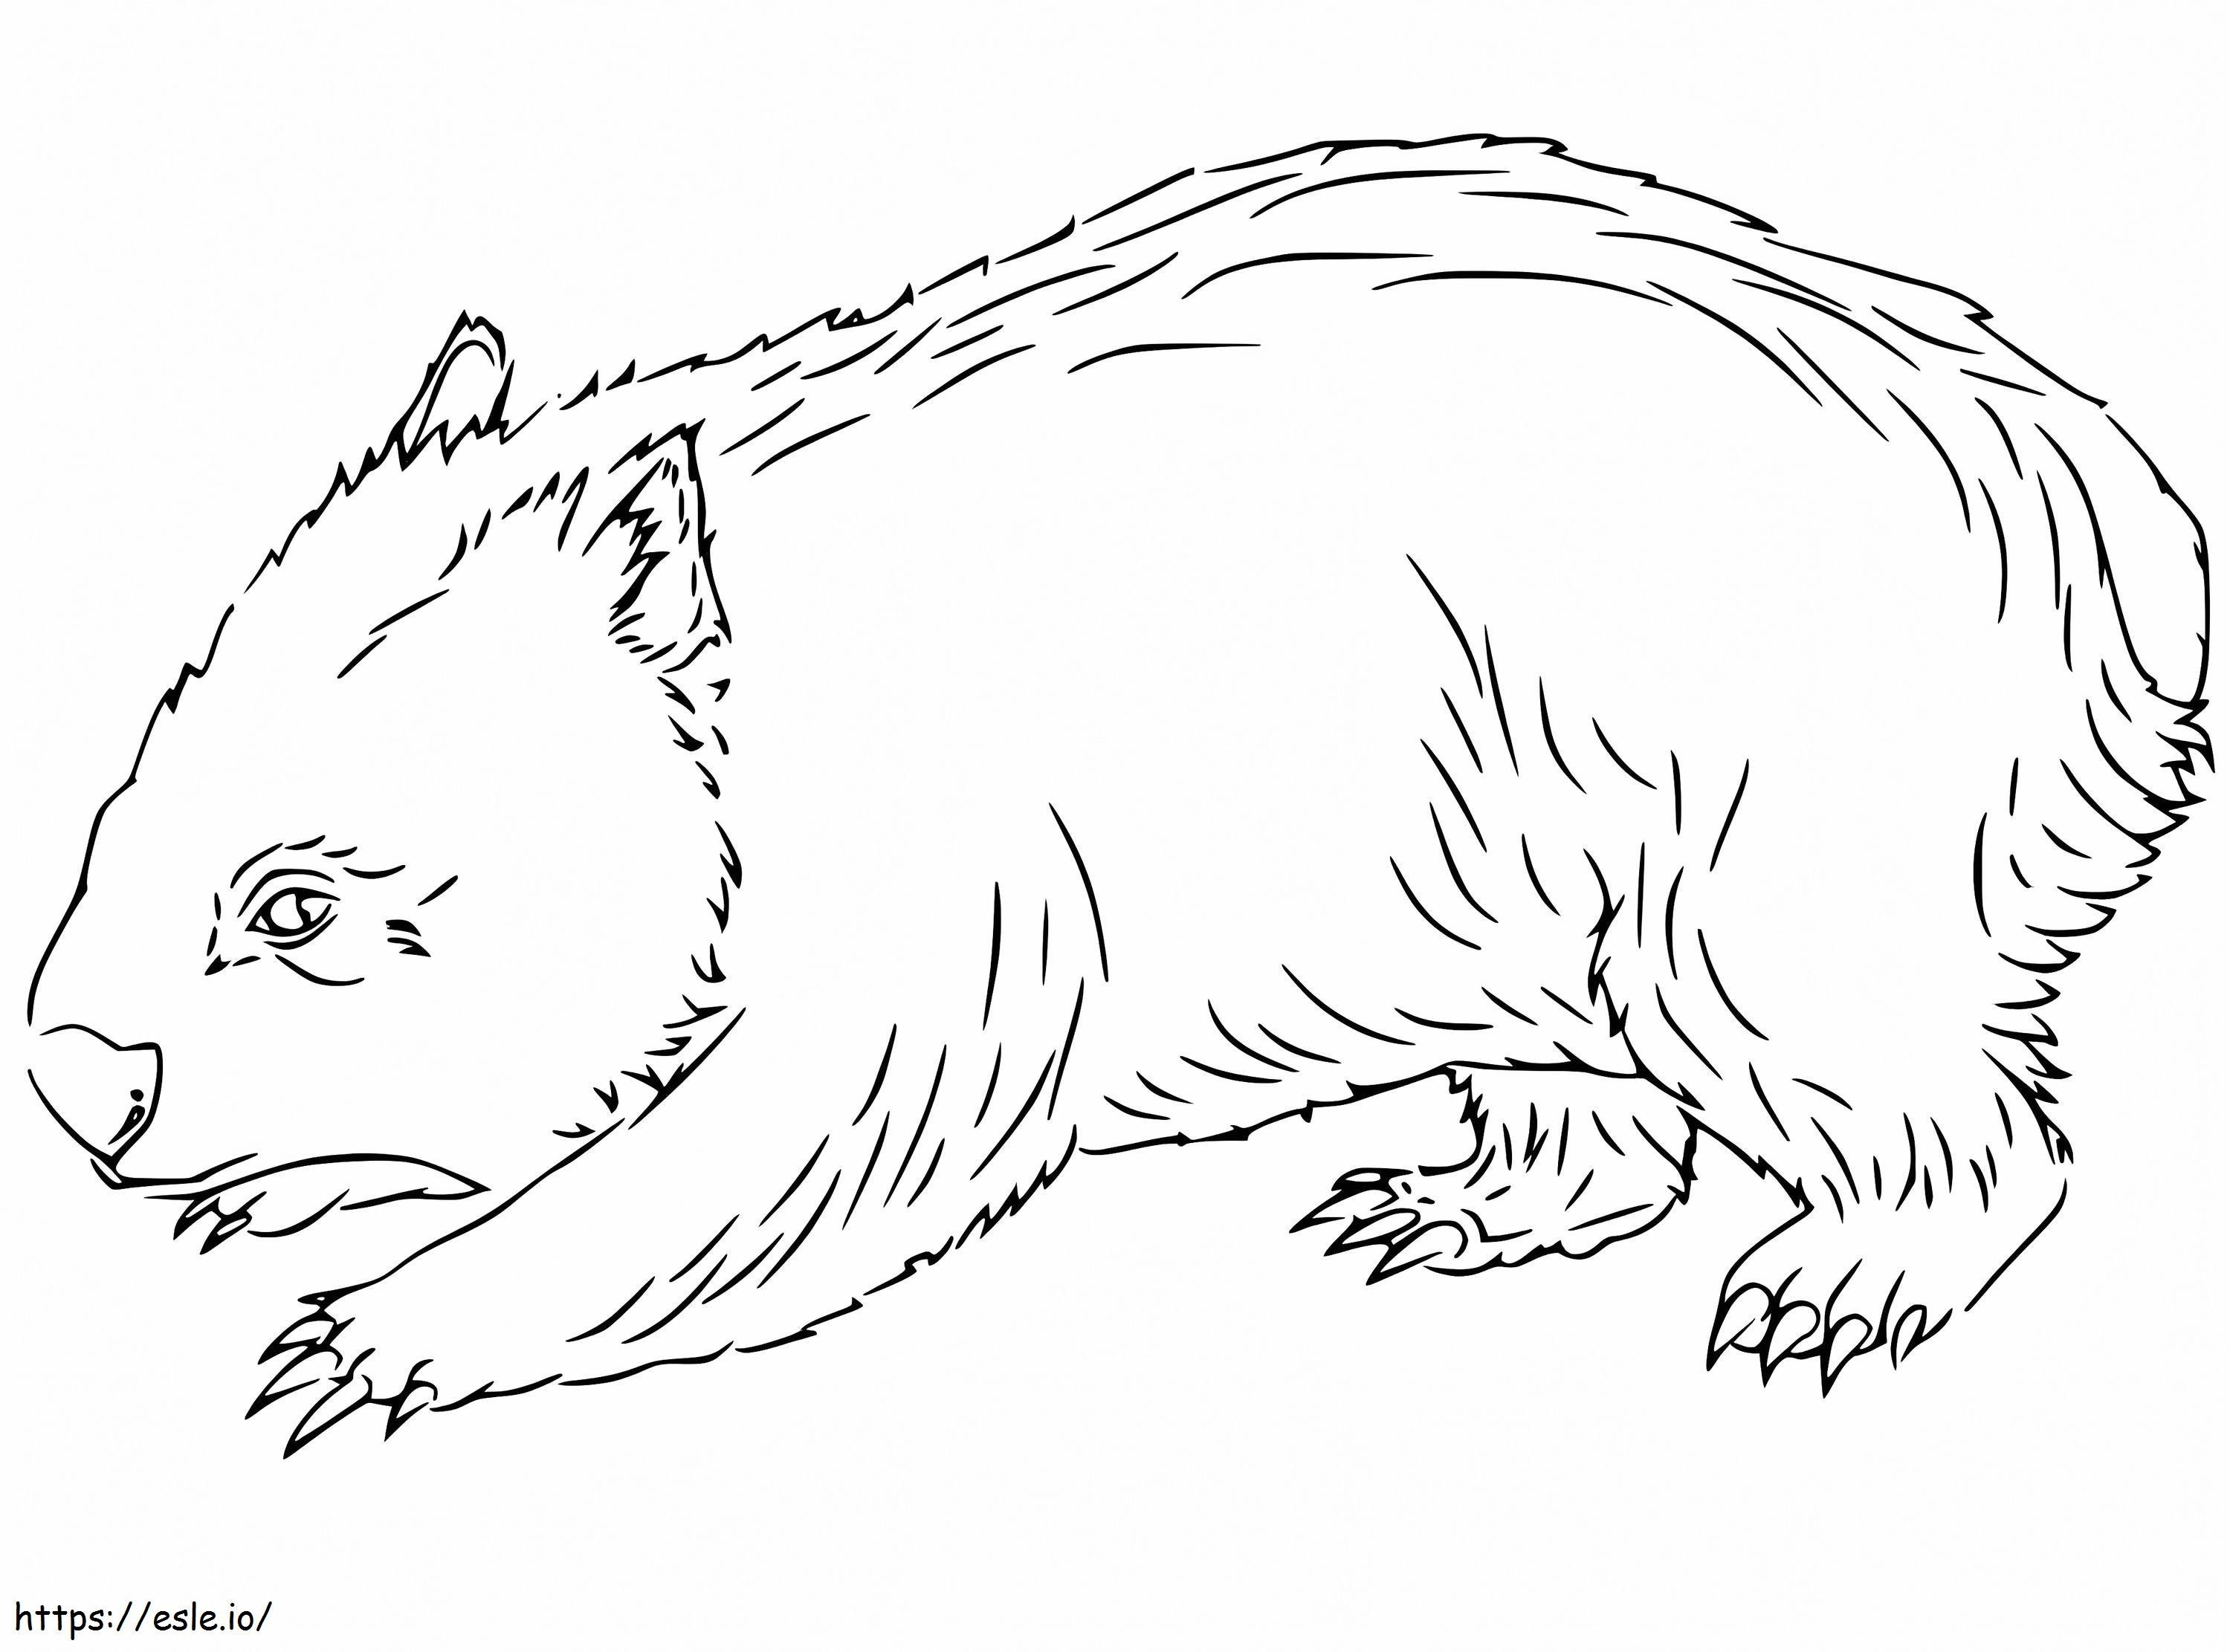 Wombat 1 coloring page